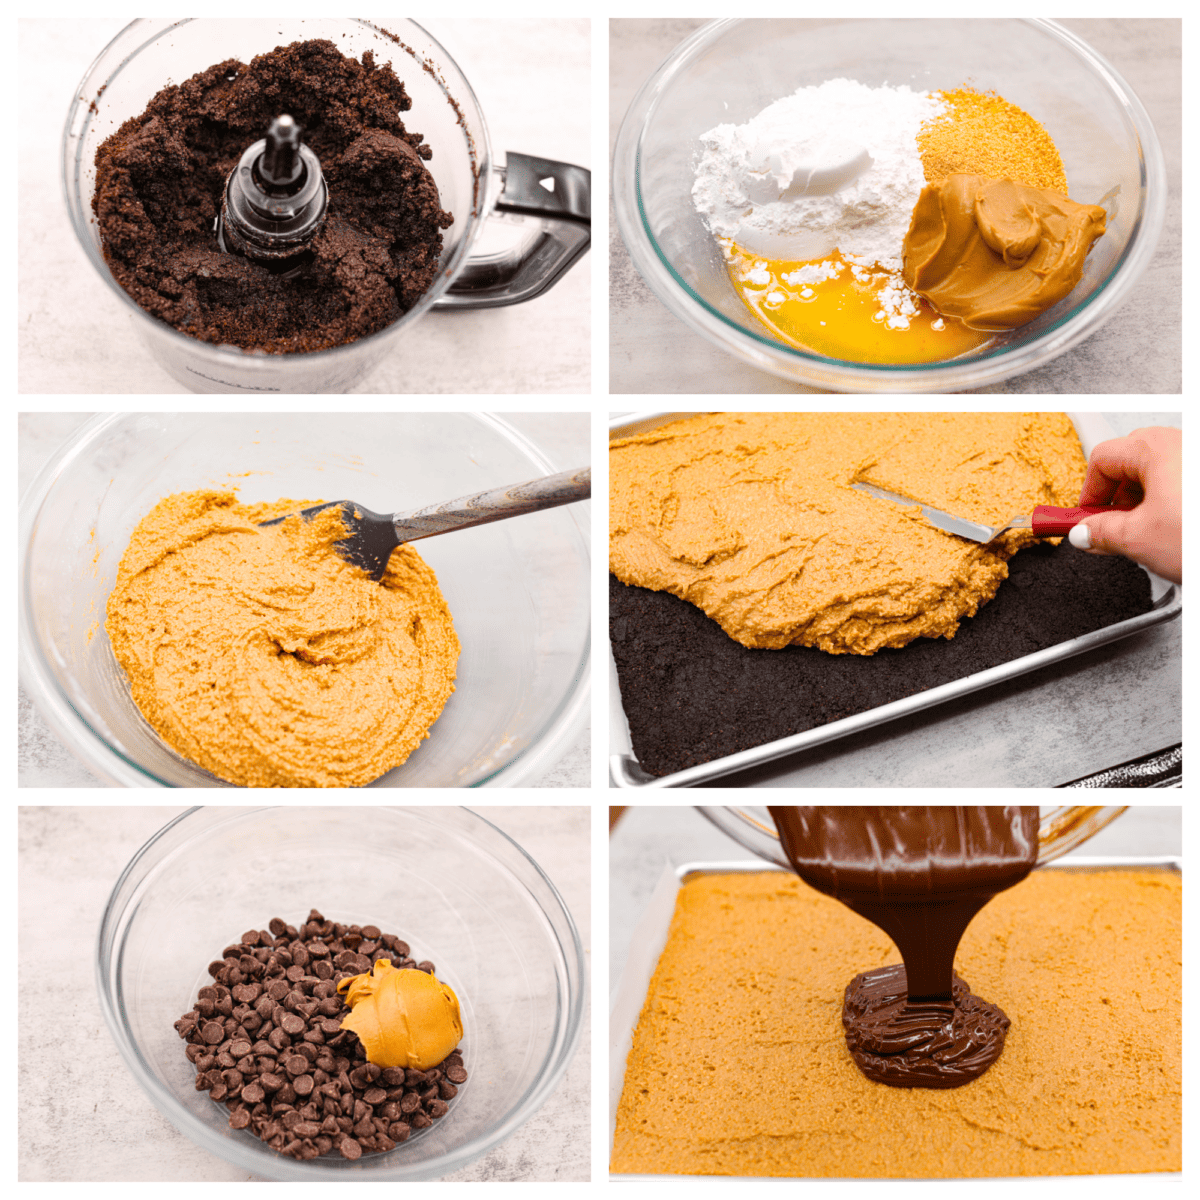 6-photo collage of the dessert bars being layered with Oreo, peanut butter, and chocolate.